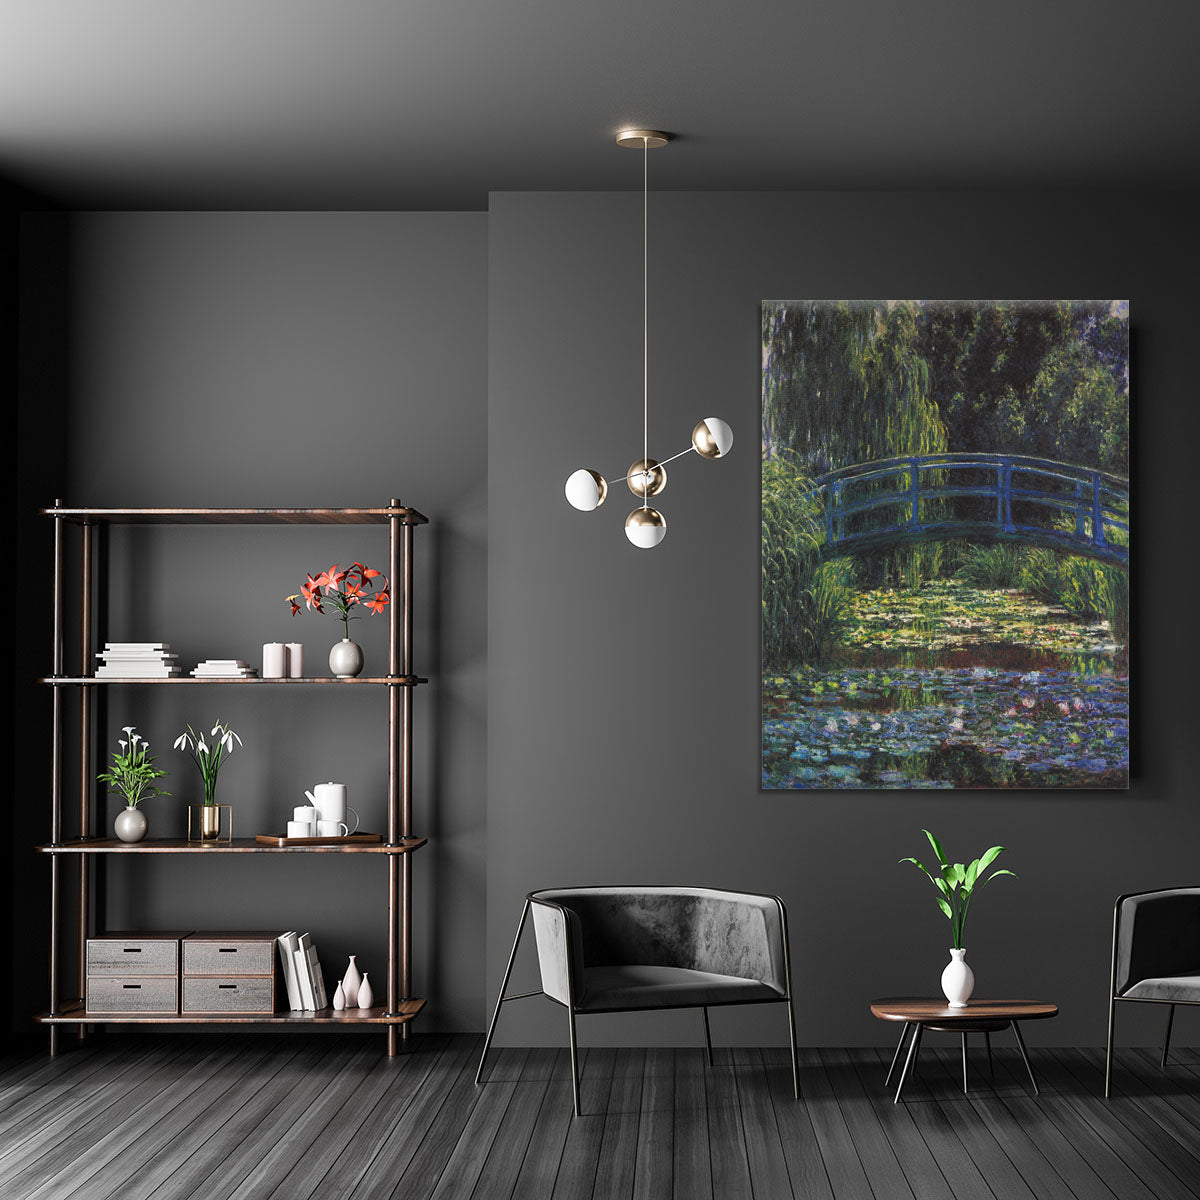 Water Lily Pond 6 by Monet Canvas Print or Poster - Canvas Art Rocks - 5